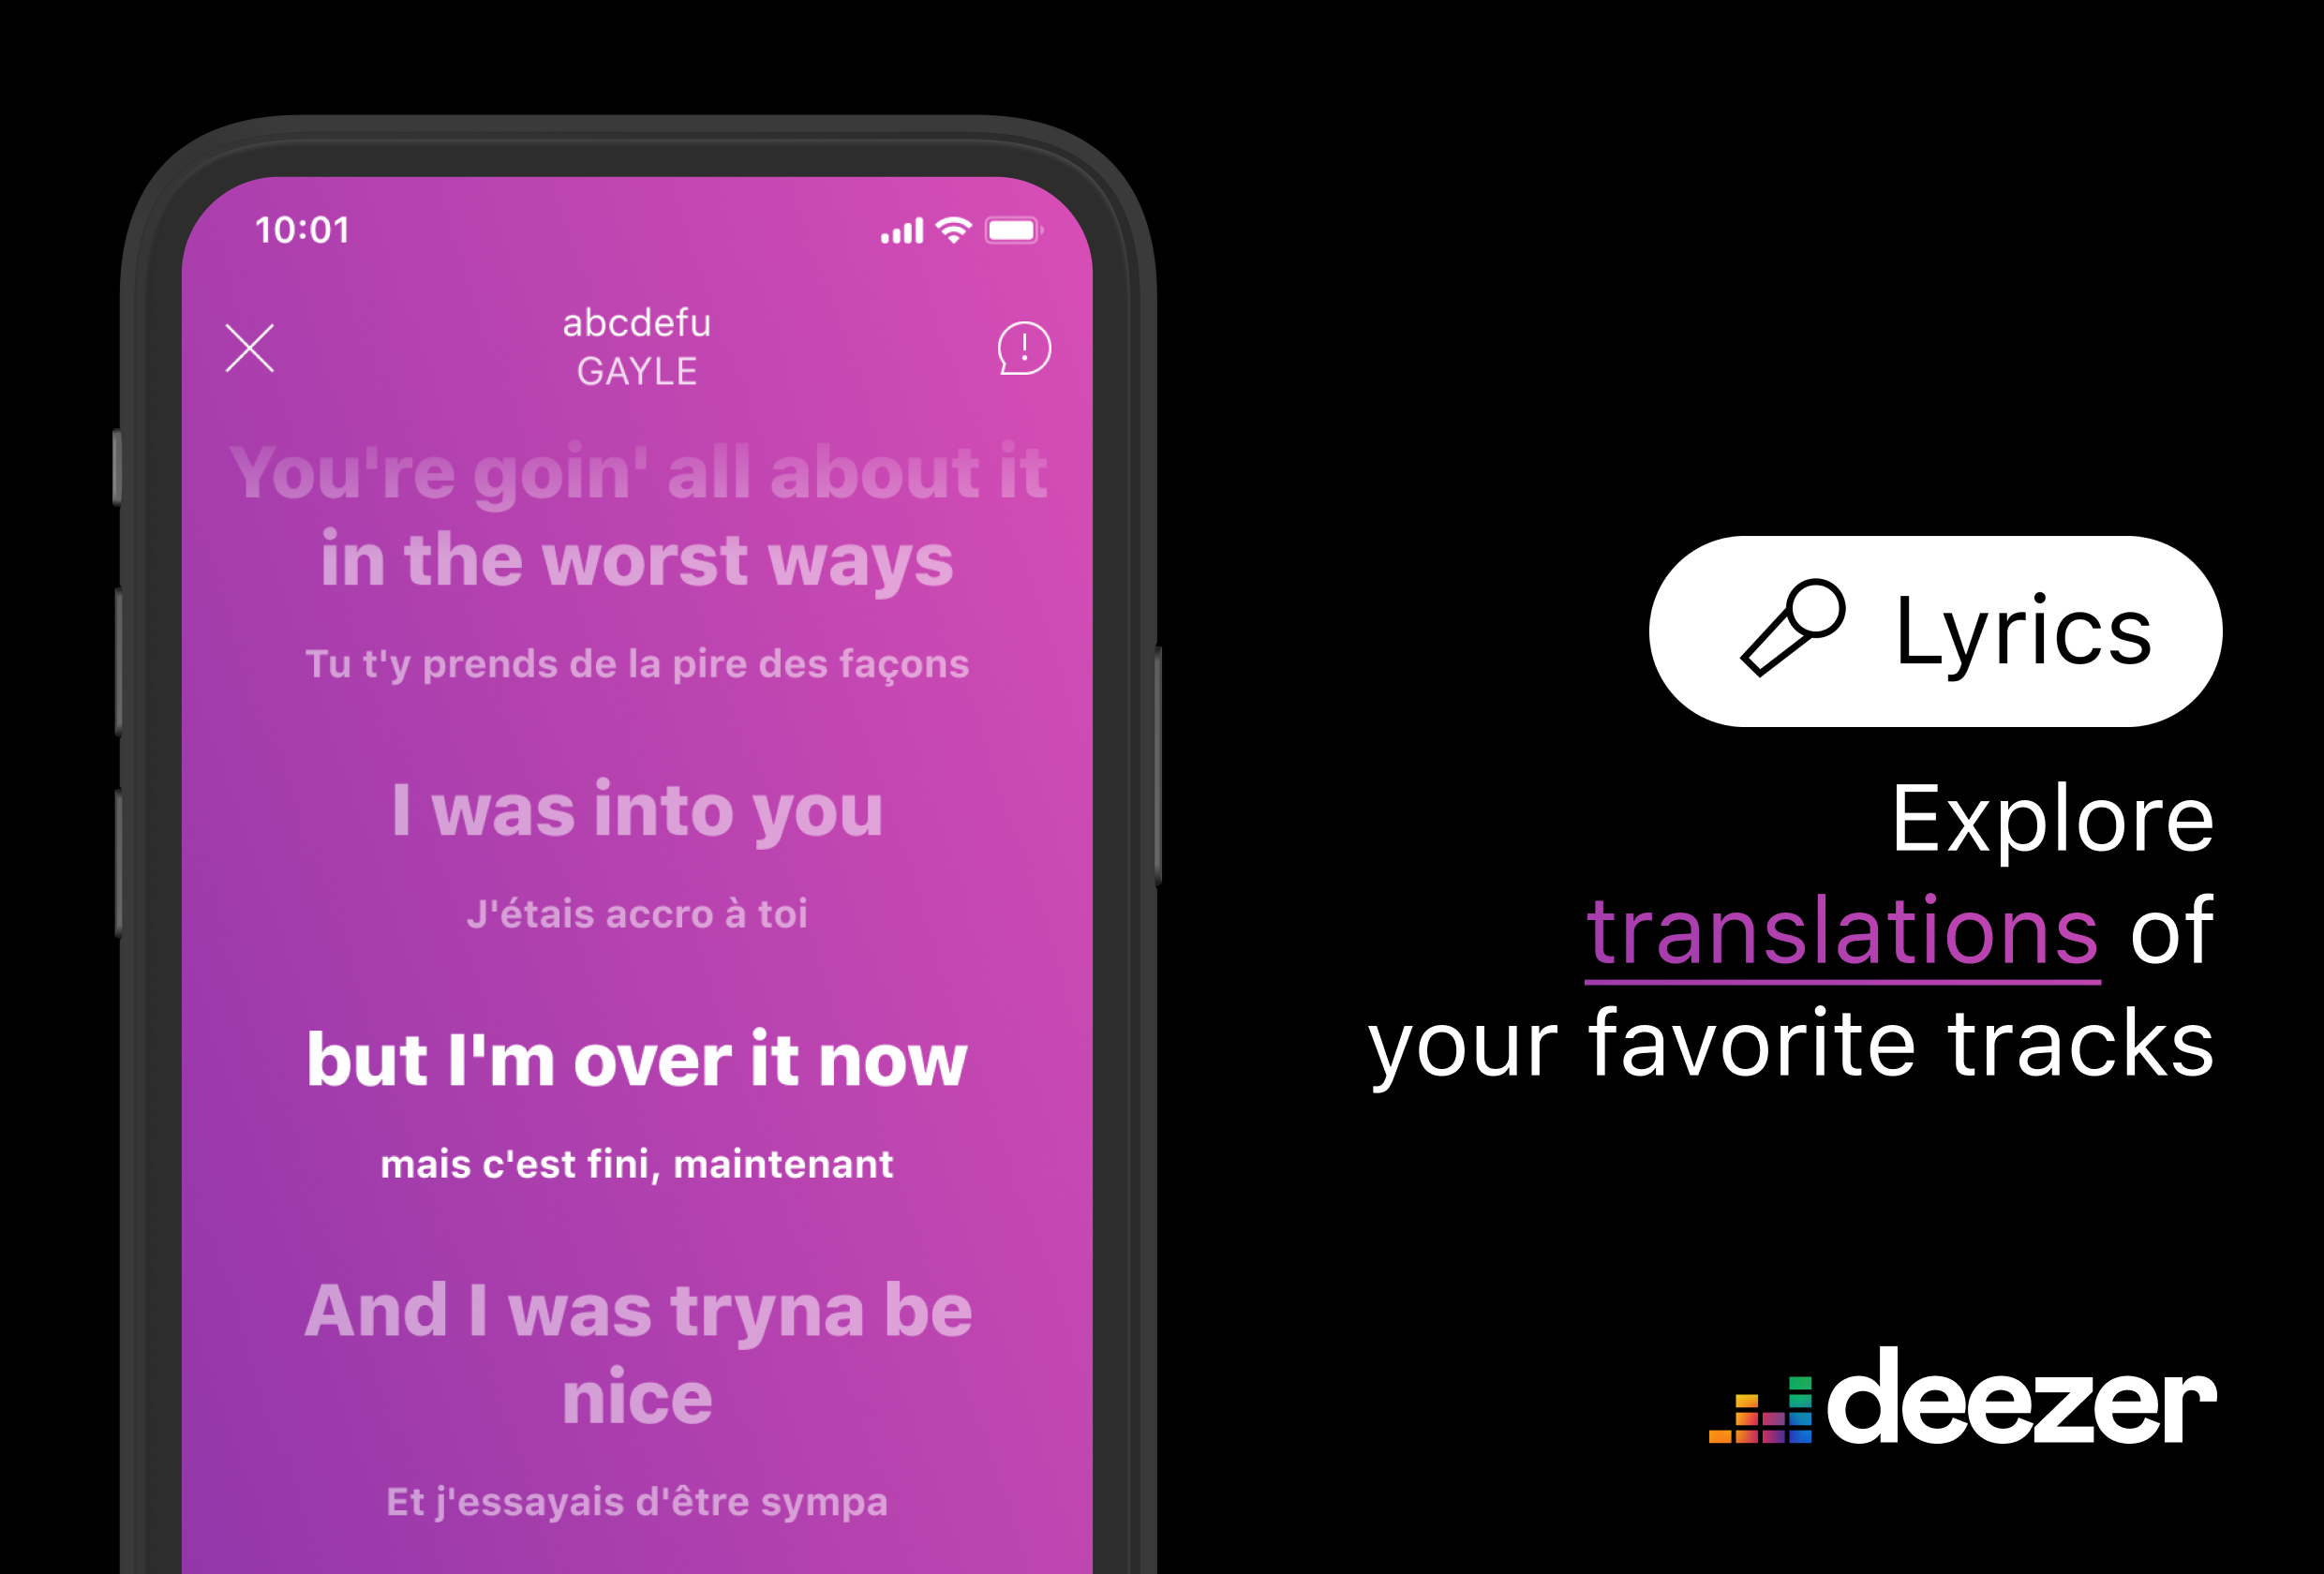 How to see lyrics on Deezer in different languages